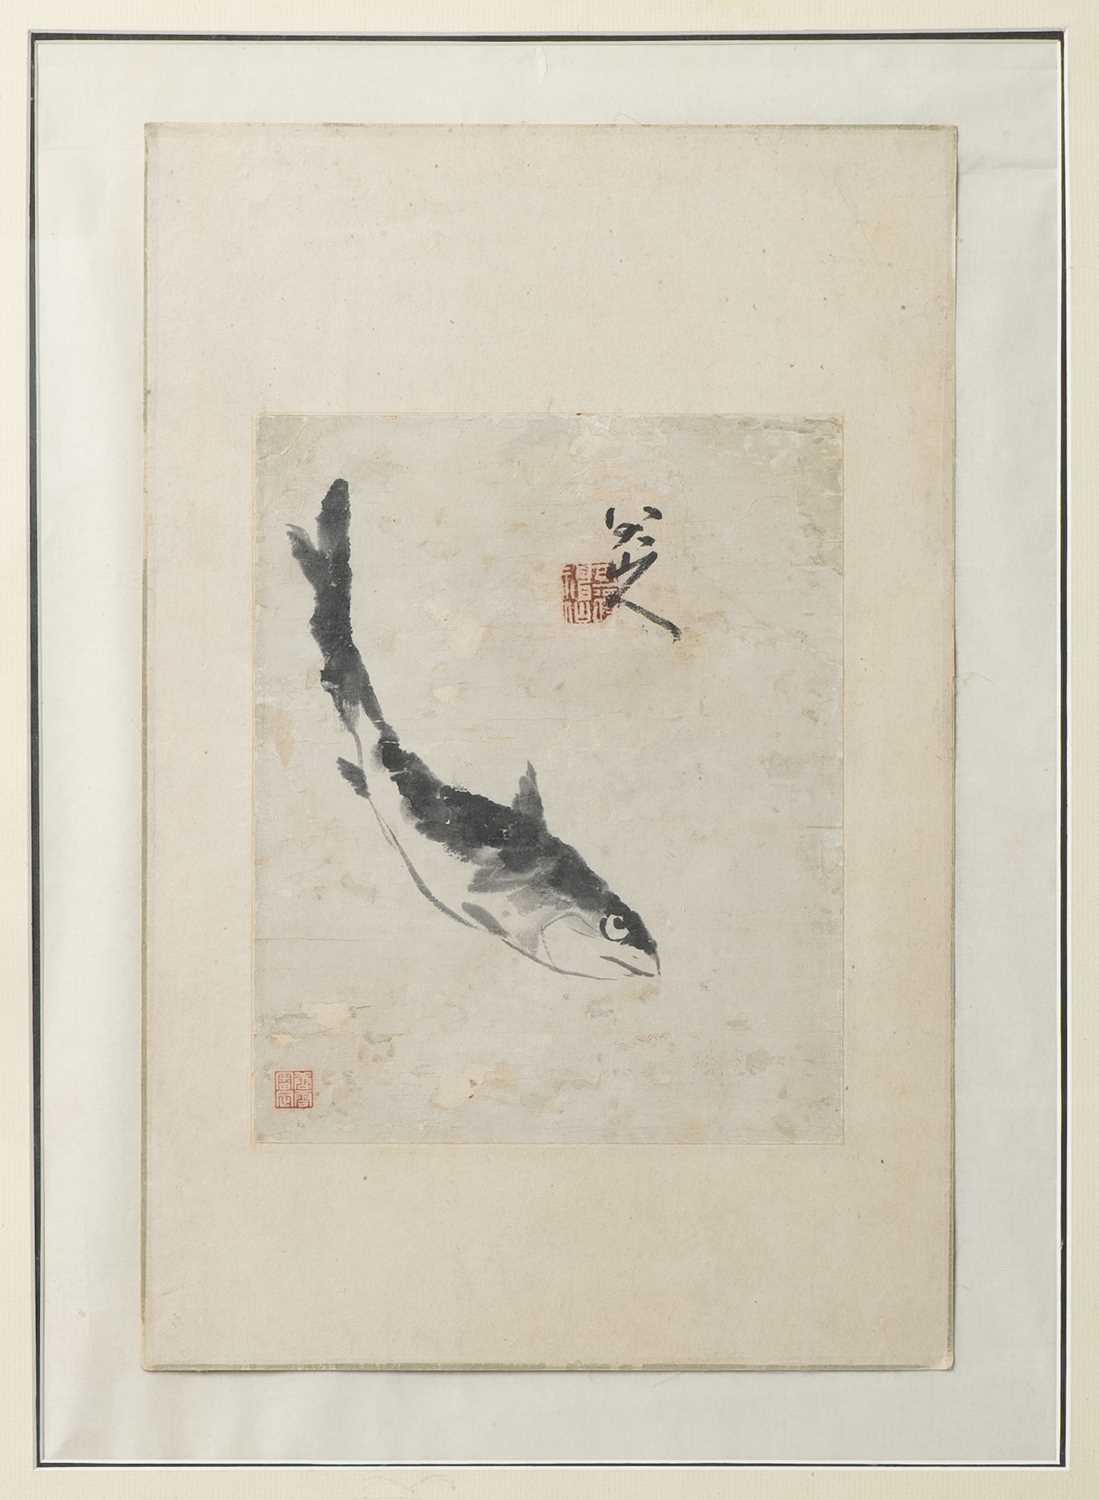 ATTRIBUTED TO BADA SHANREN (QING DYNASTY) A FISH A Chinese painting, ink and colour on paper, signed - Image 2 of 2